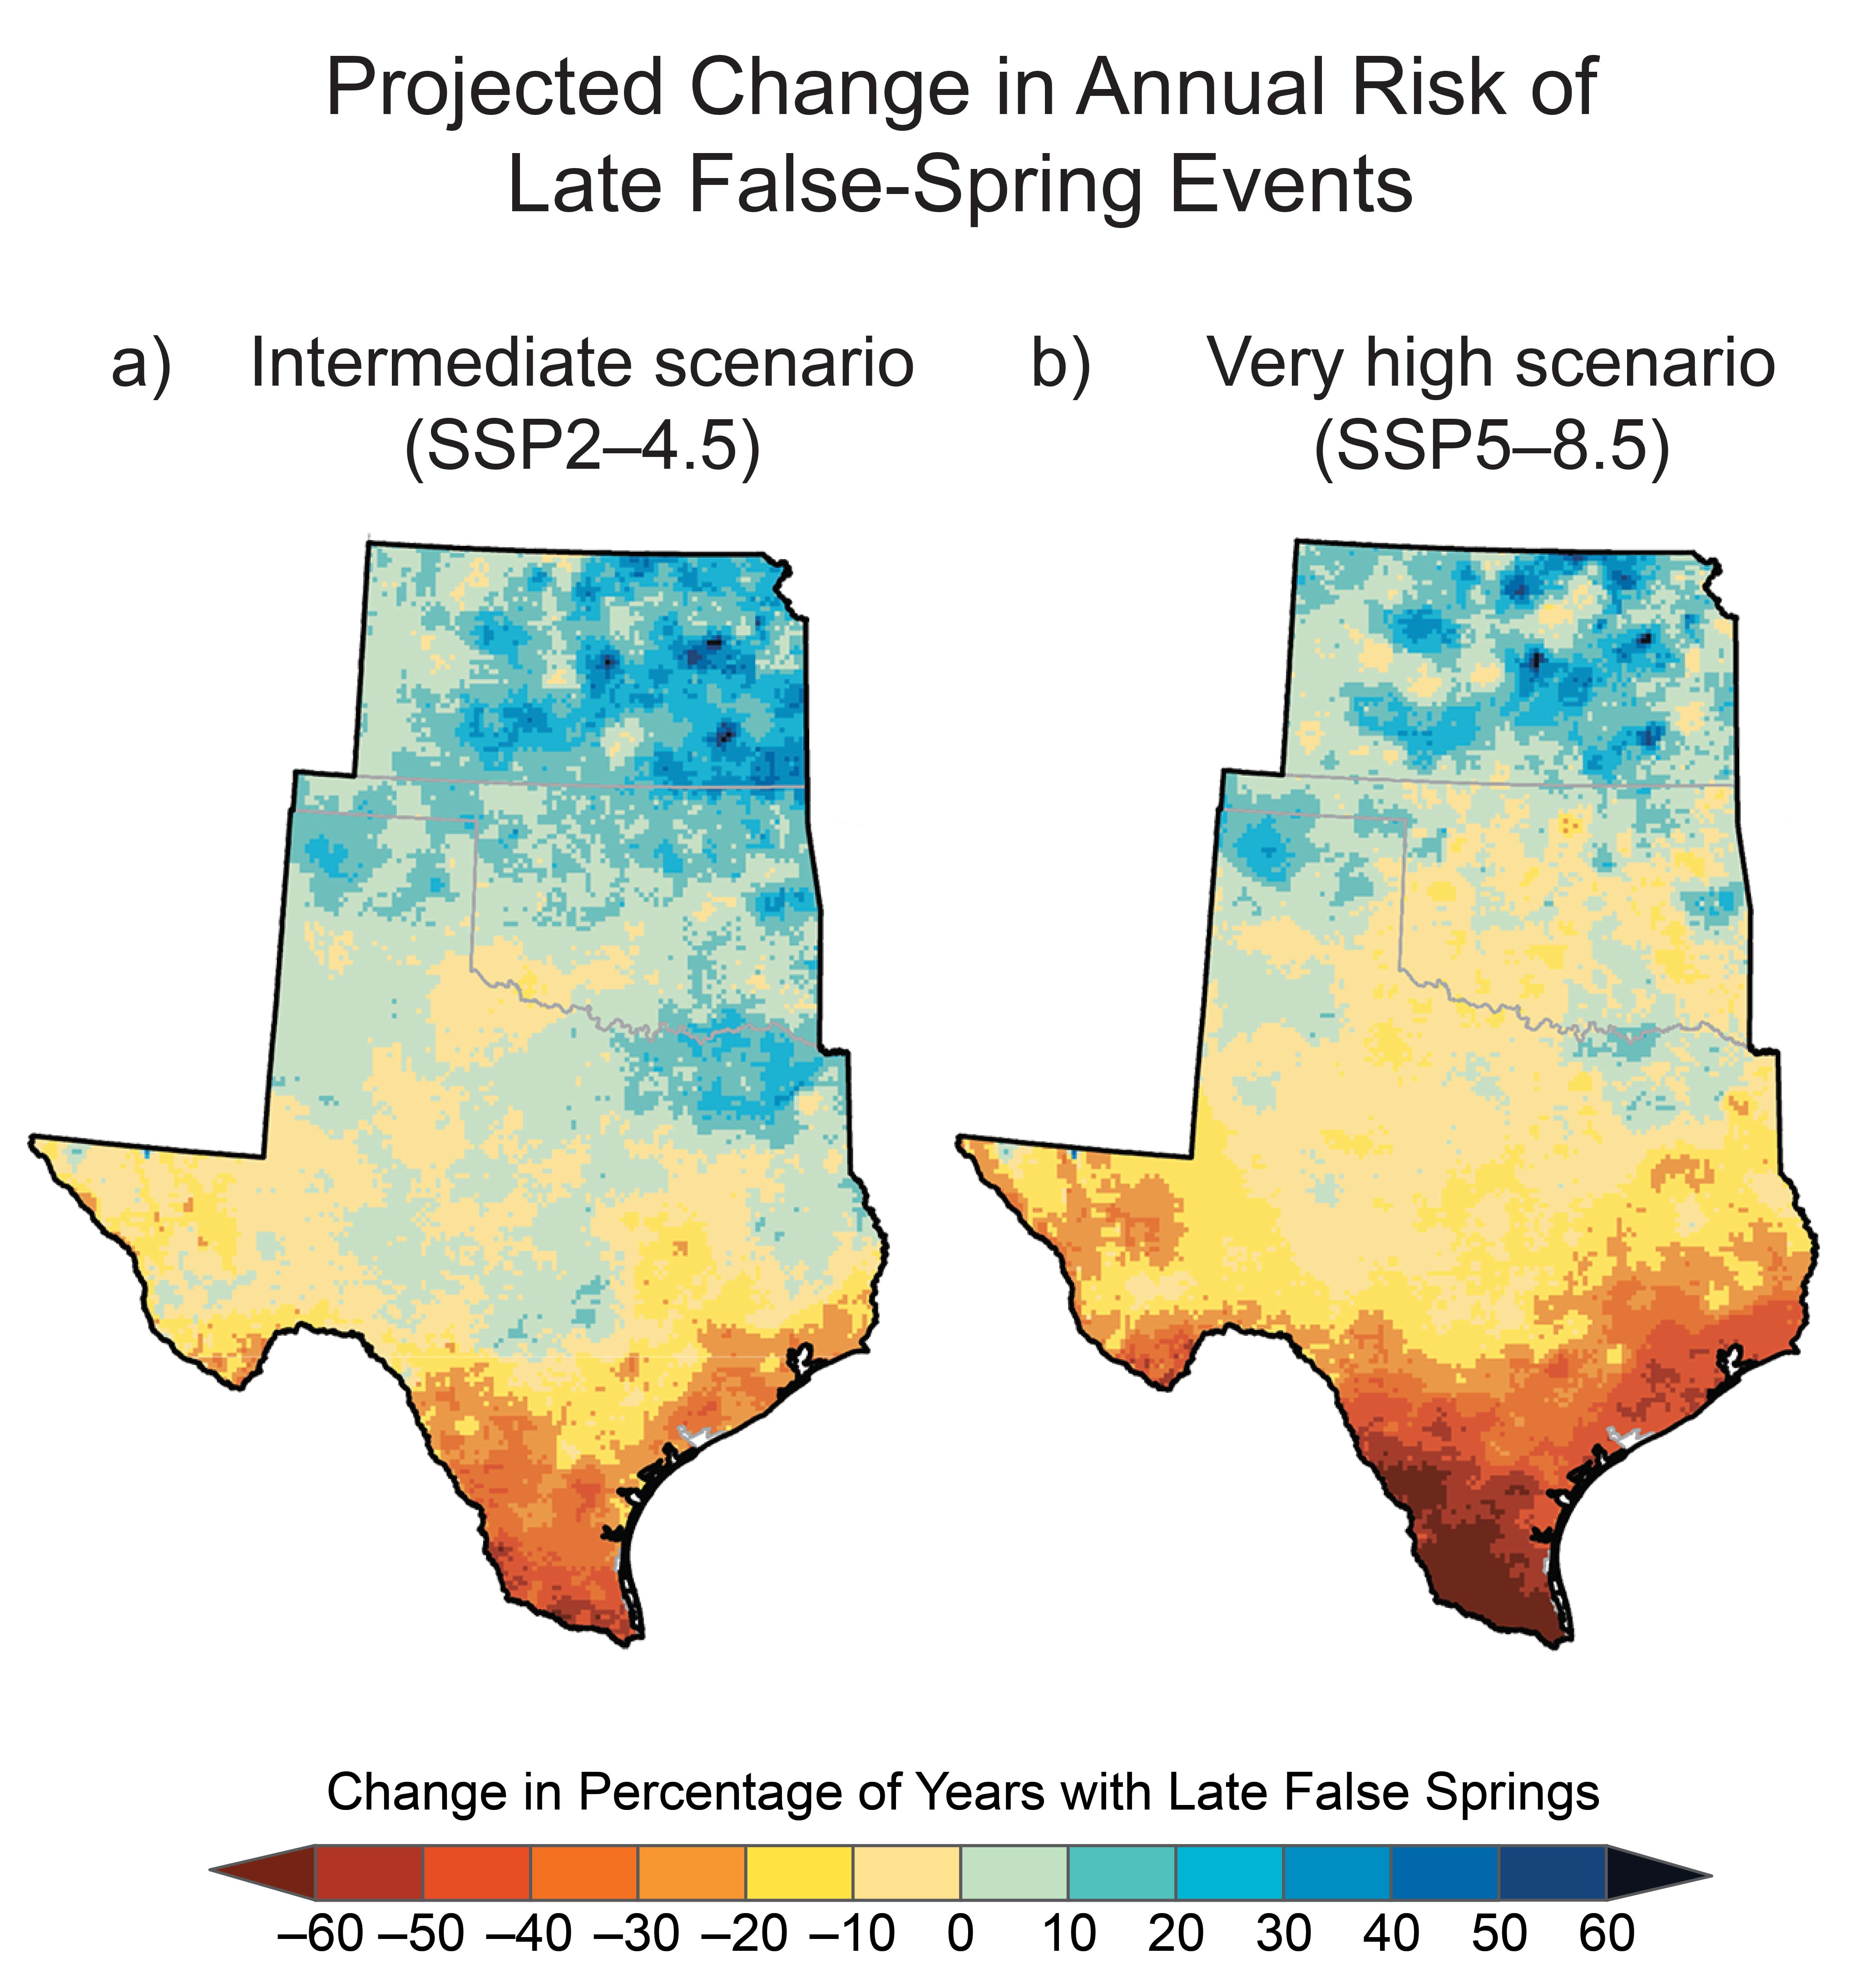 Projected Change in Annual Risk of Late False-Spring Events